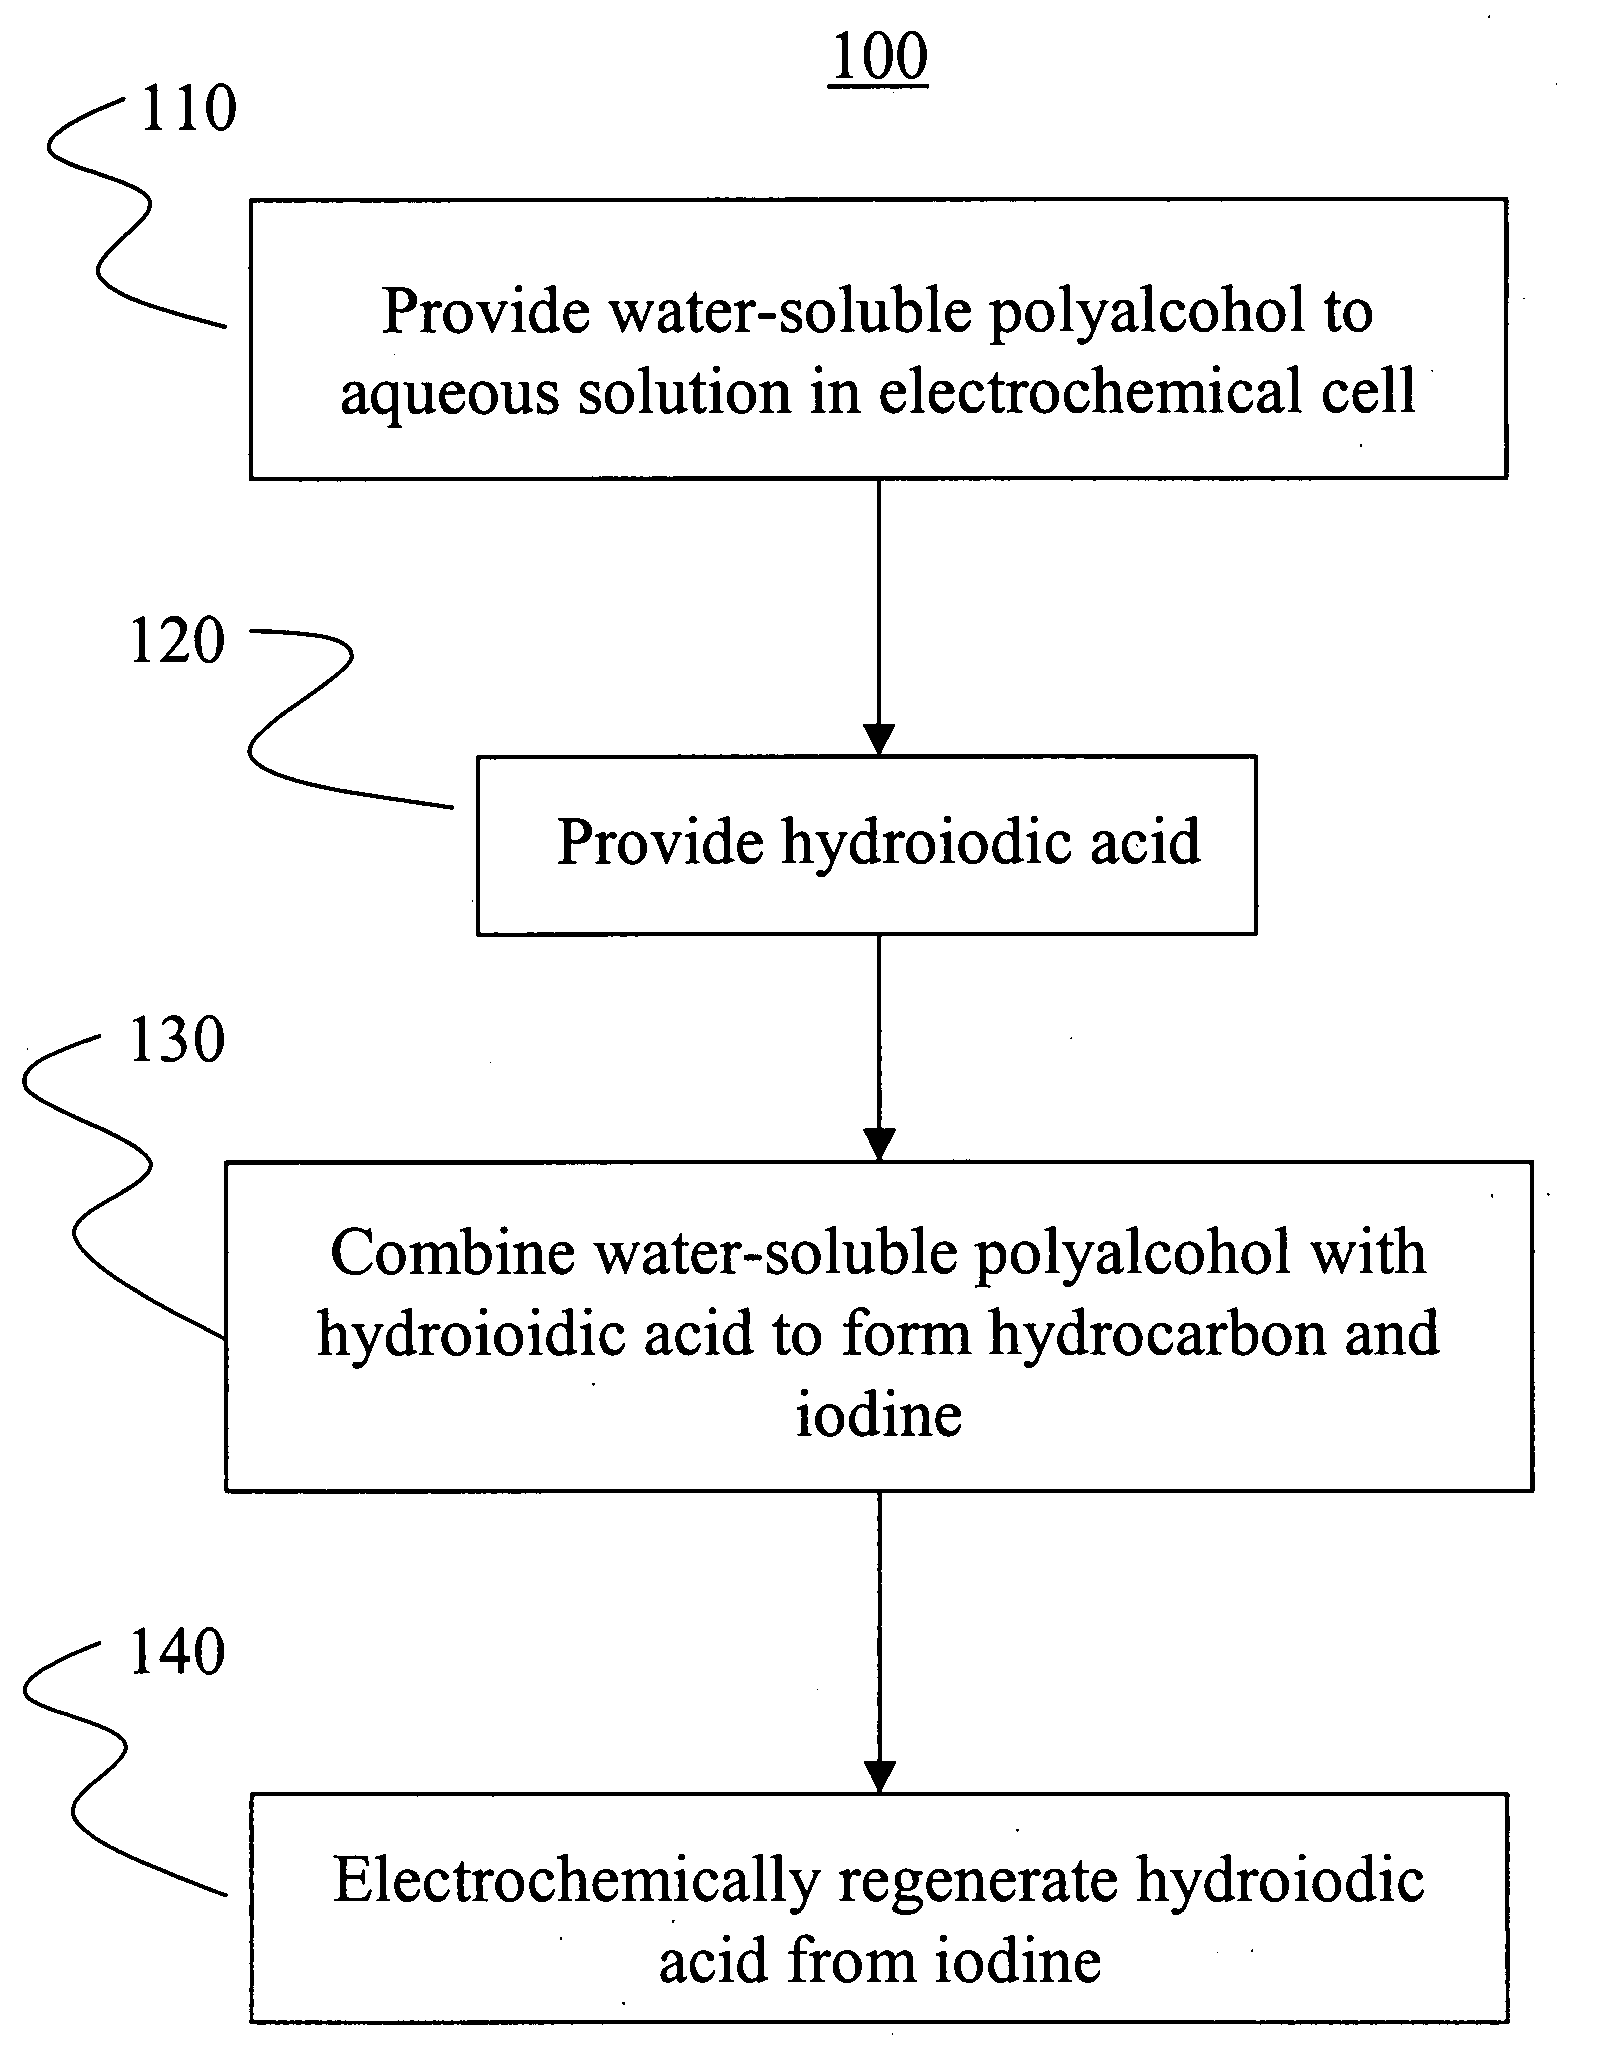 Electrochemical conversion of polyalcohols to hydrocarbons